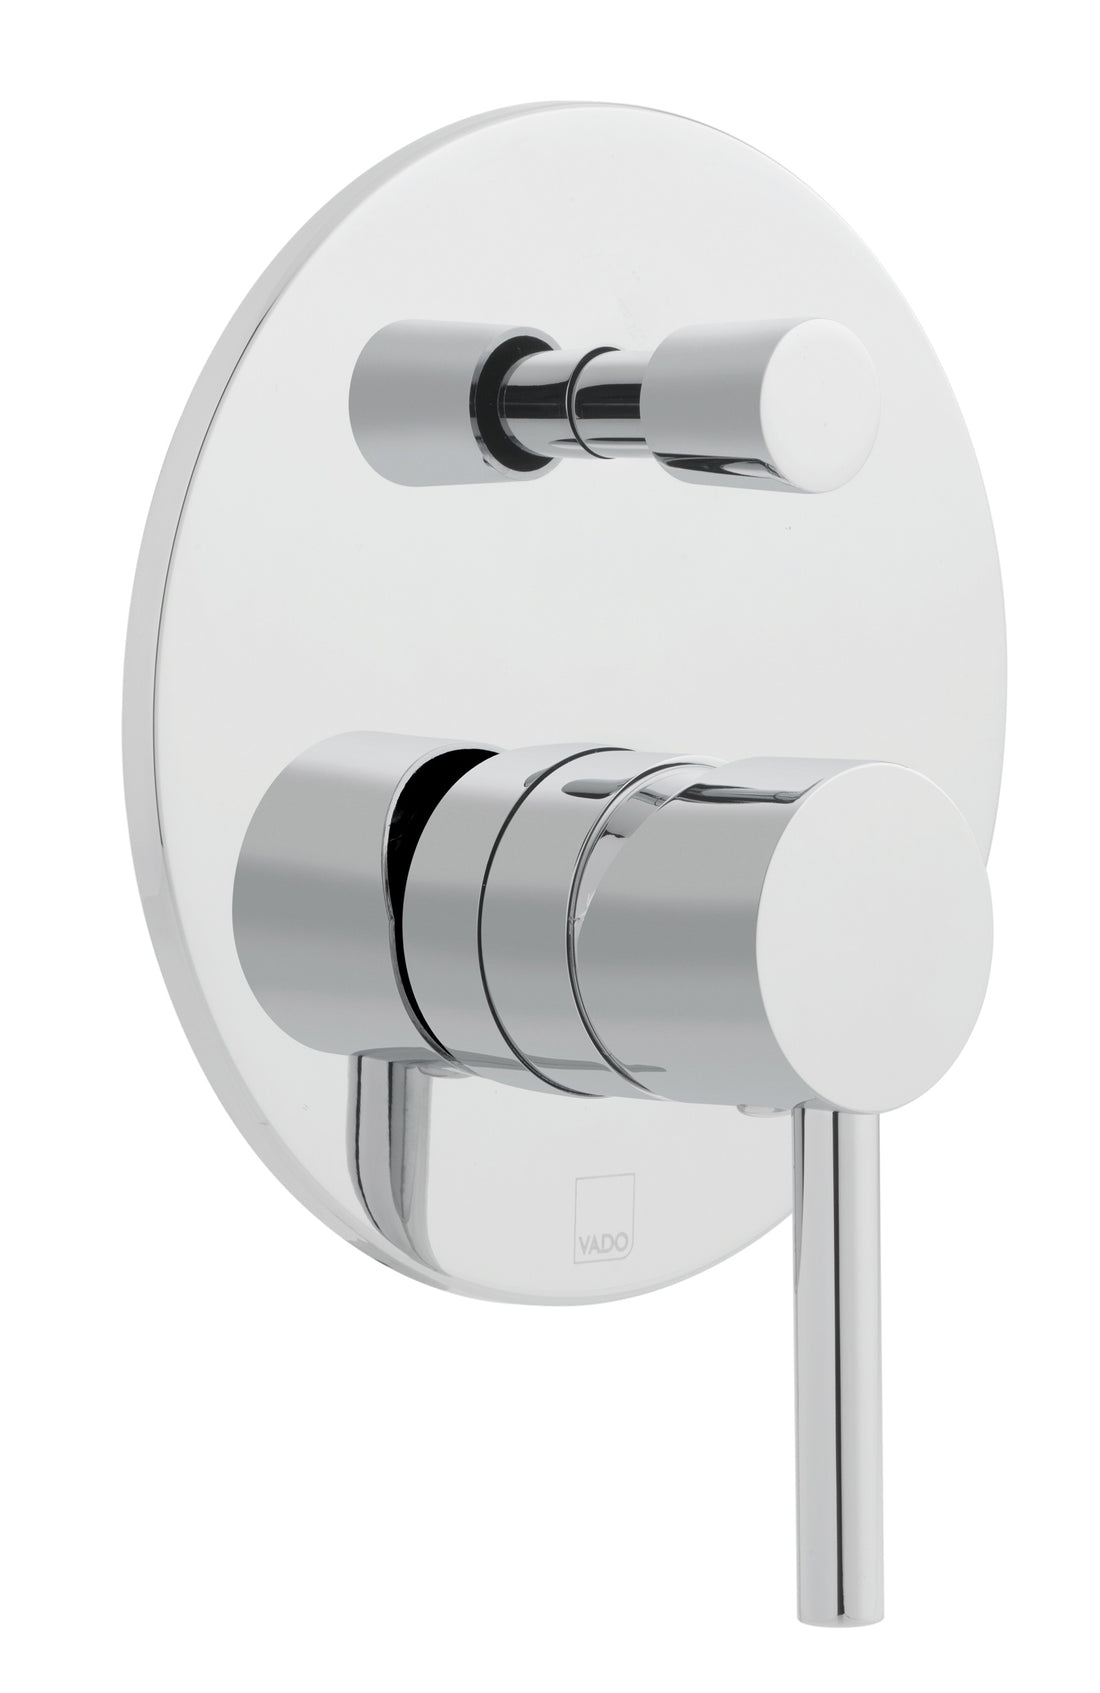 Vado Zoo 1 Outlet Single Lever Concealed Manual Valve Round Backplate